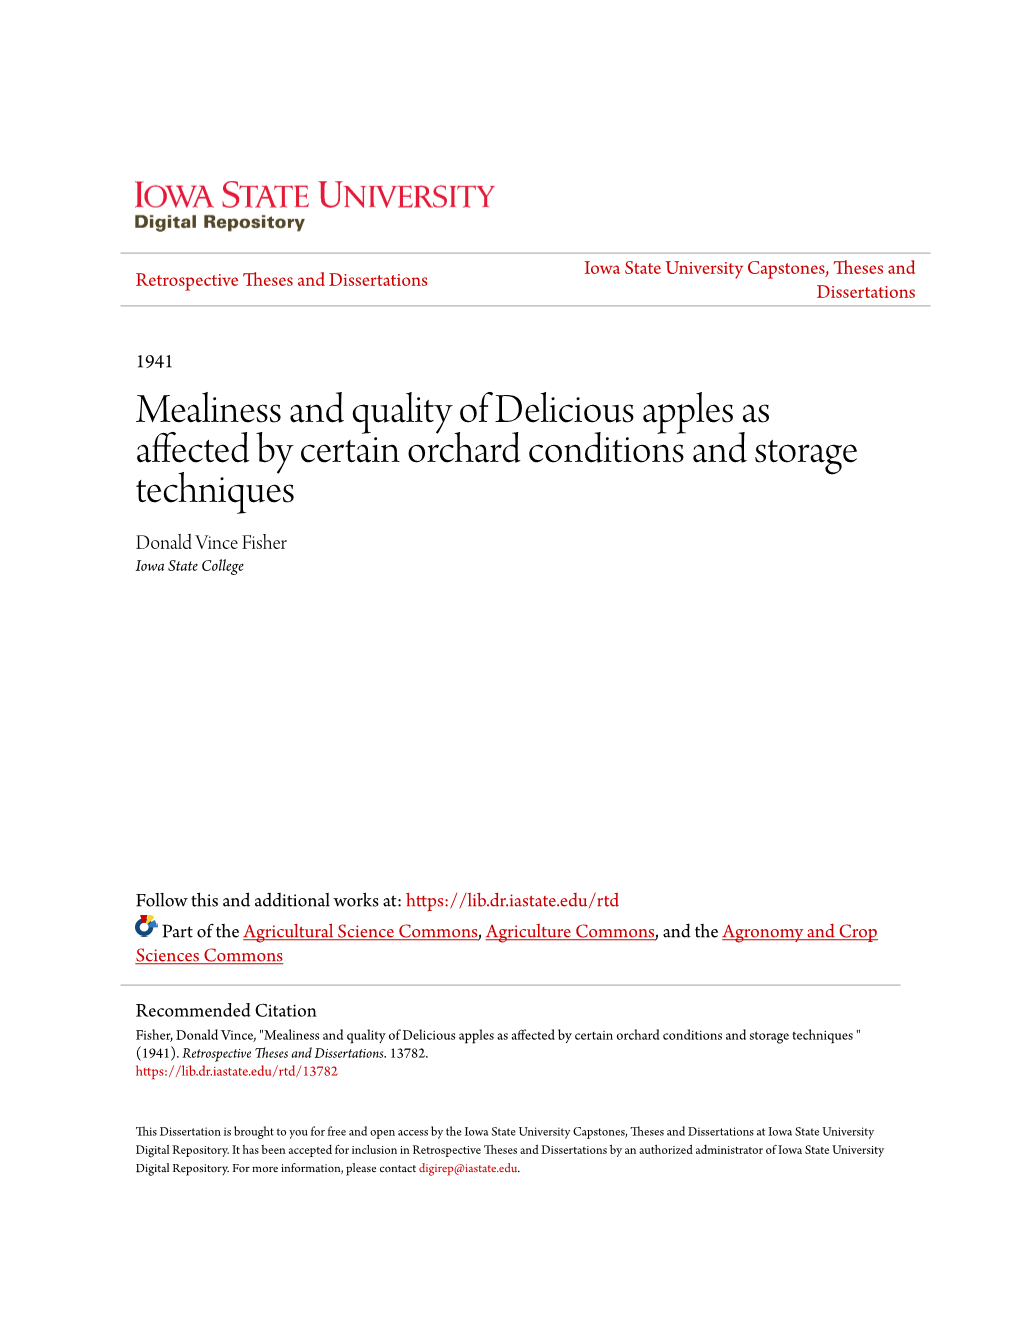 Mealiness and Quality of Delicious Apples As Affected by Certain Orchard Conditions and Storage Techniques Donald Vince Fisher Iowa State College